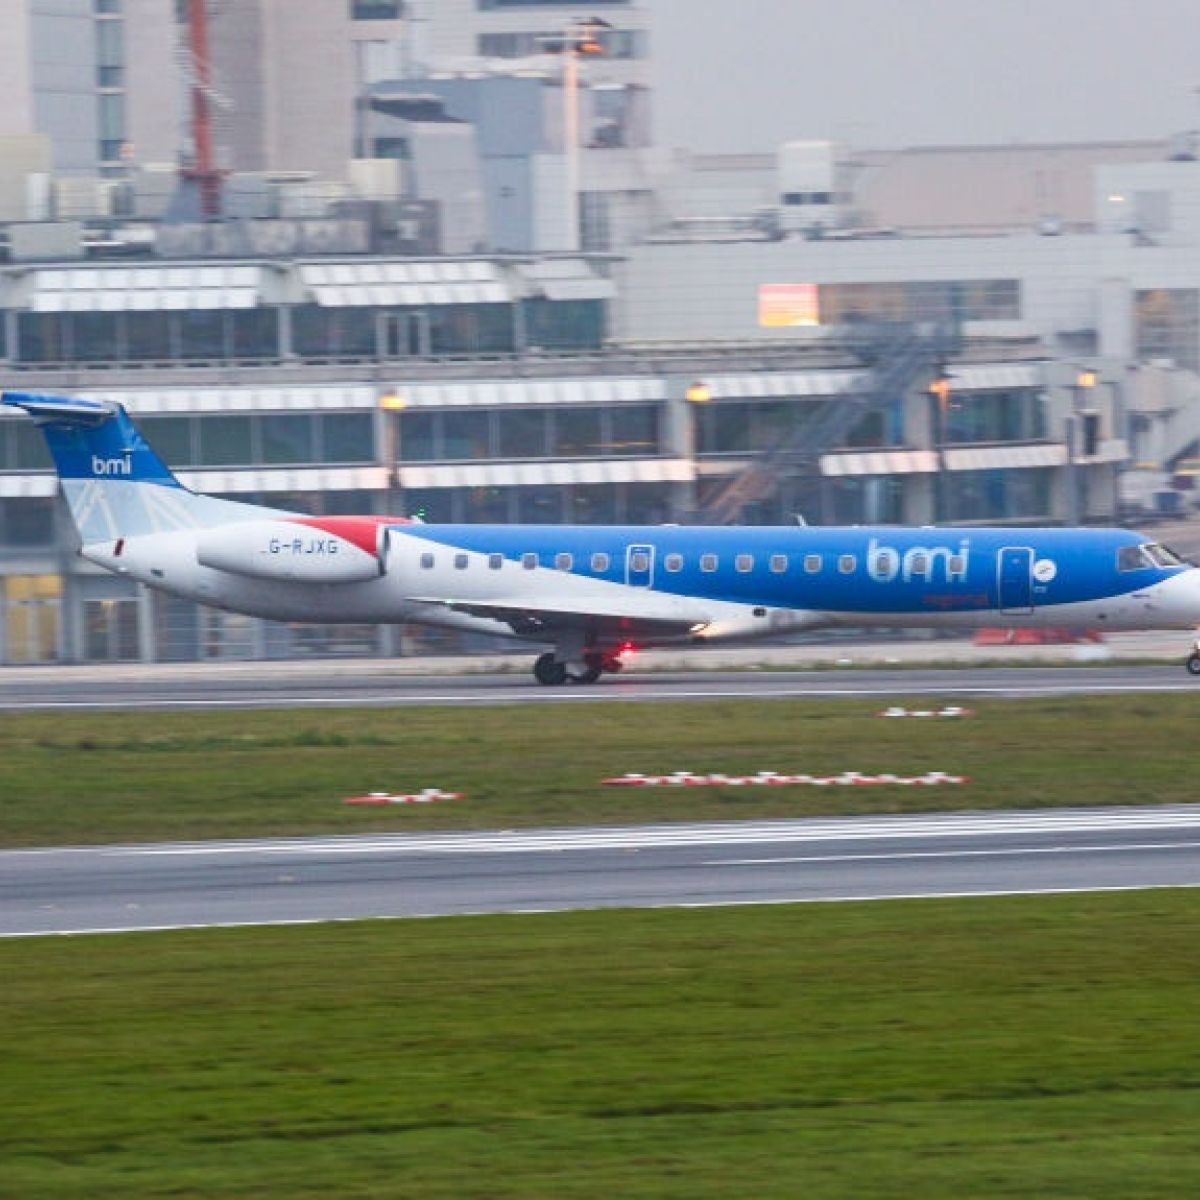 Derry Airport Reviews Stansted Route Options After Flybmi Collapse